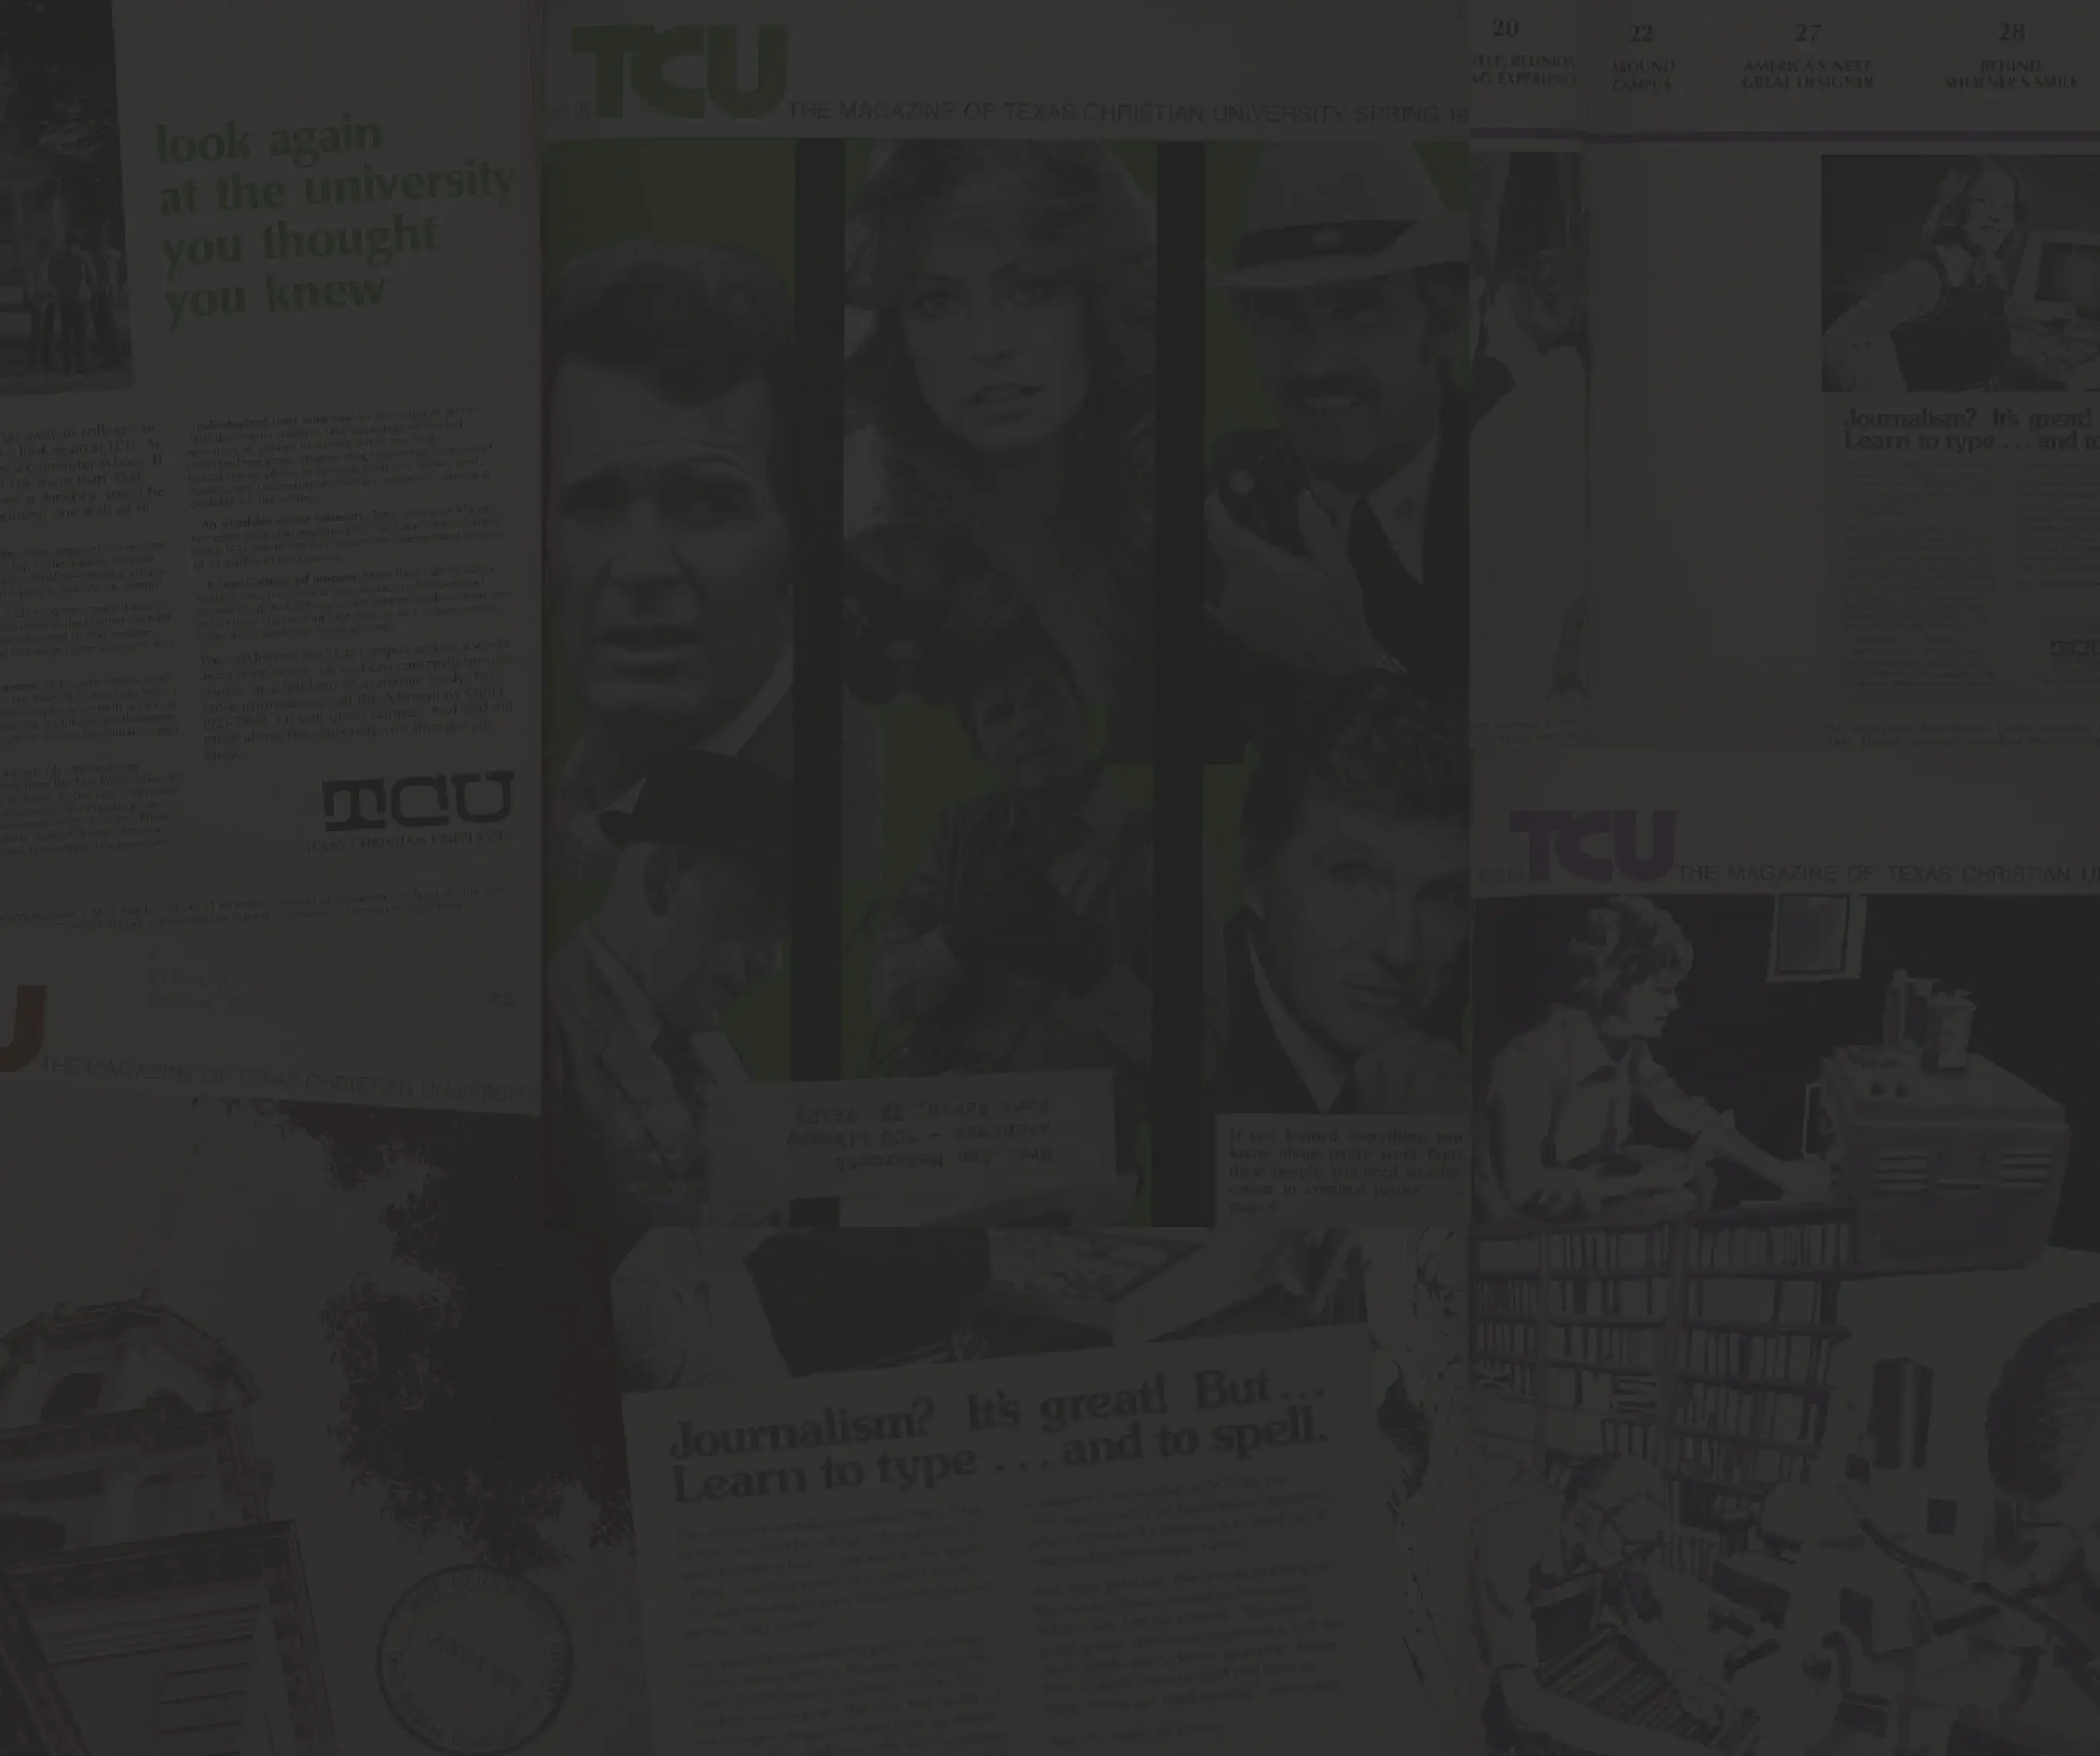 collage of T.C.U. newspaper articles and other images